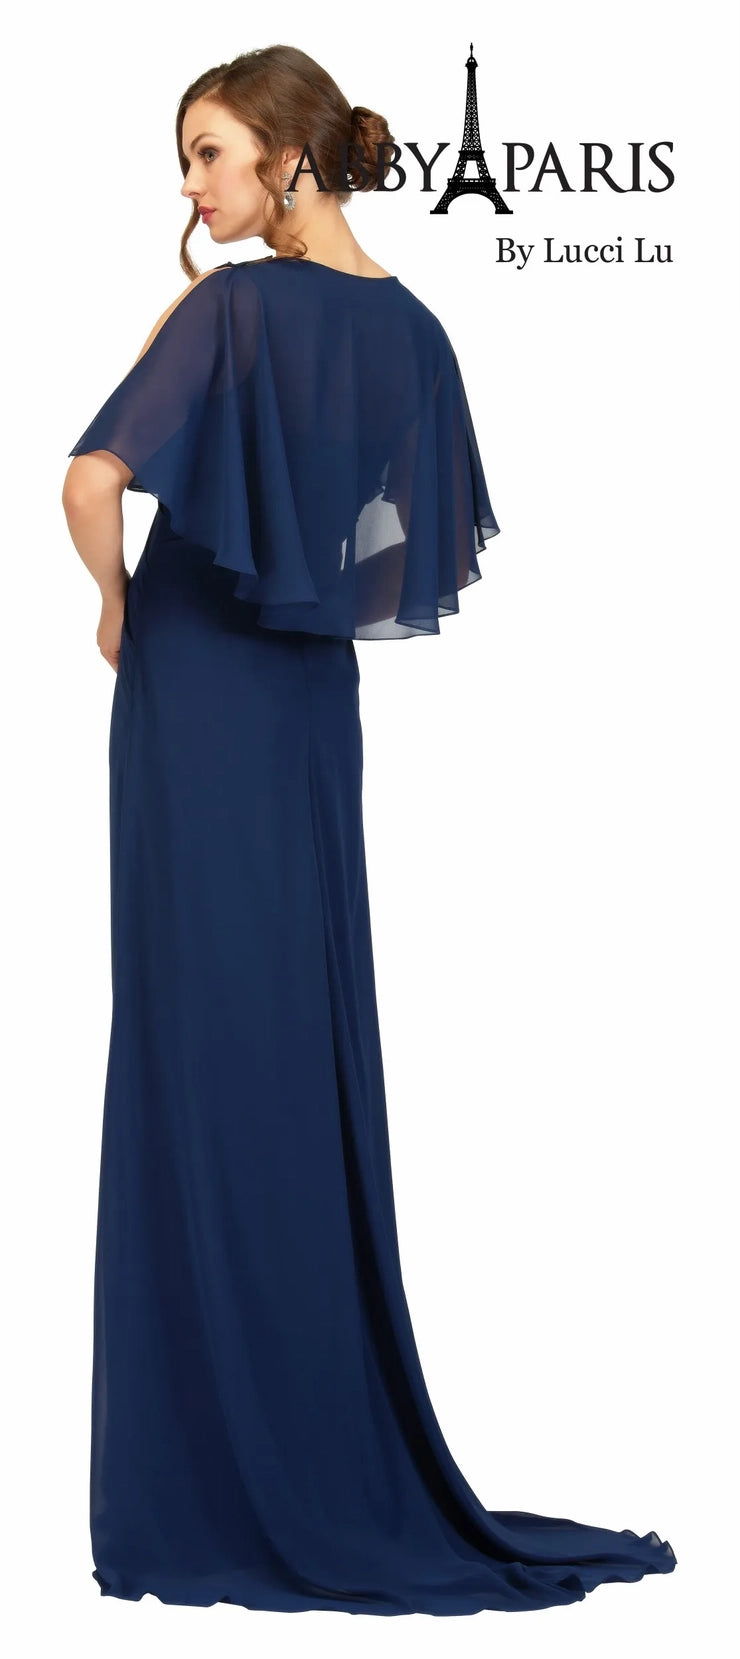 Abby Paris 96054W A-Line Chiffon V-Neck Plus Size MOB Formal Dress is perfect for making a statement on special occasions. Featuring an A-line silhouette, V-neckline, and chic chiffon fabric, this dress flatters any figure and is designed for lasting wear. Plus size options available.